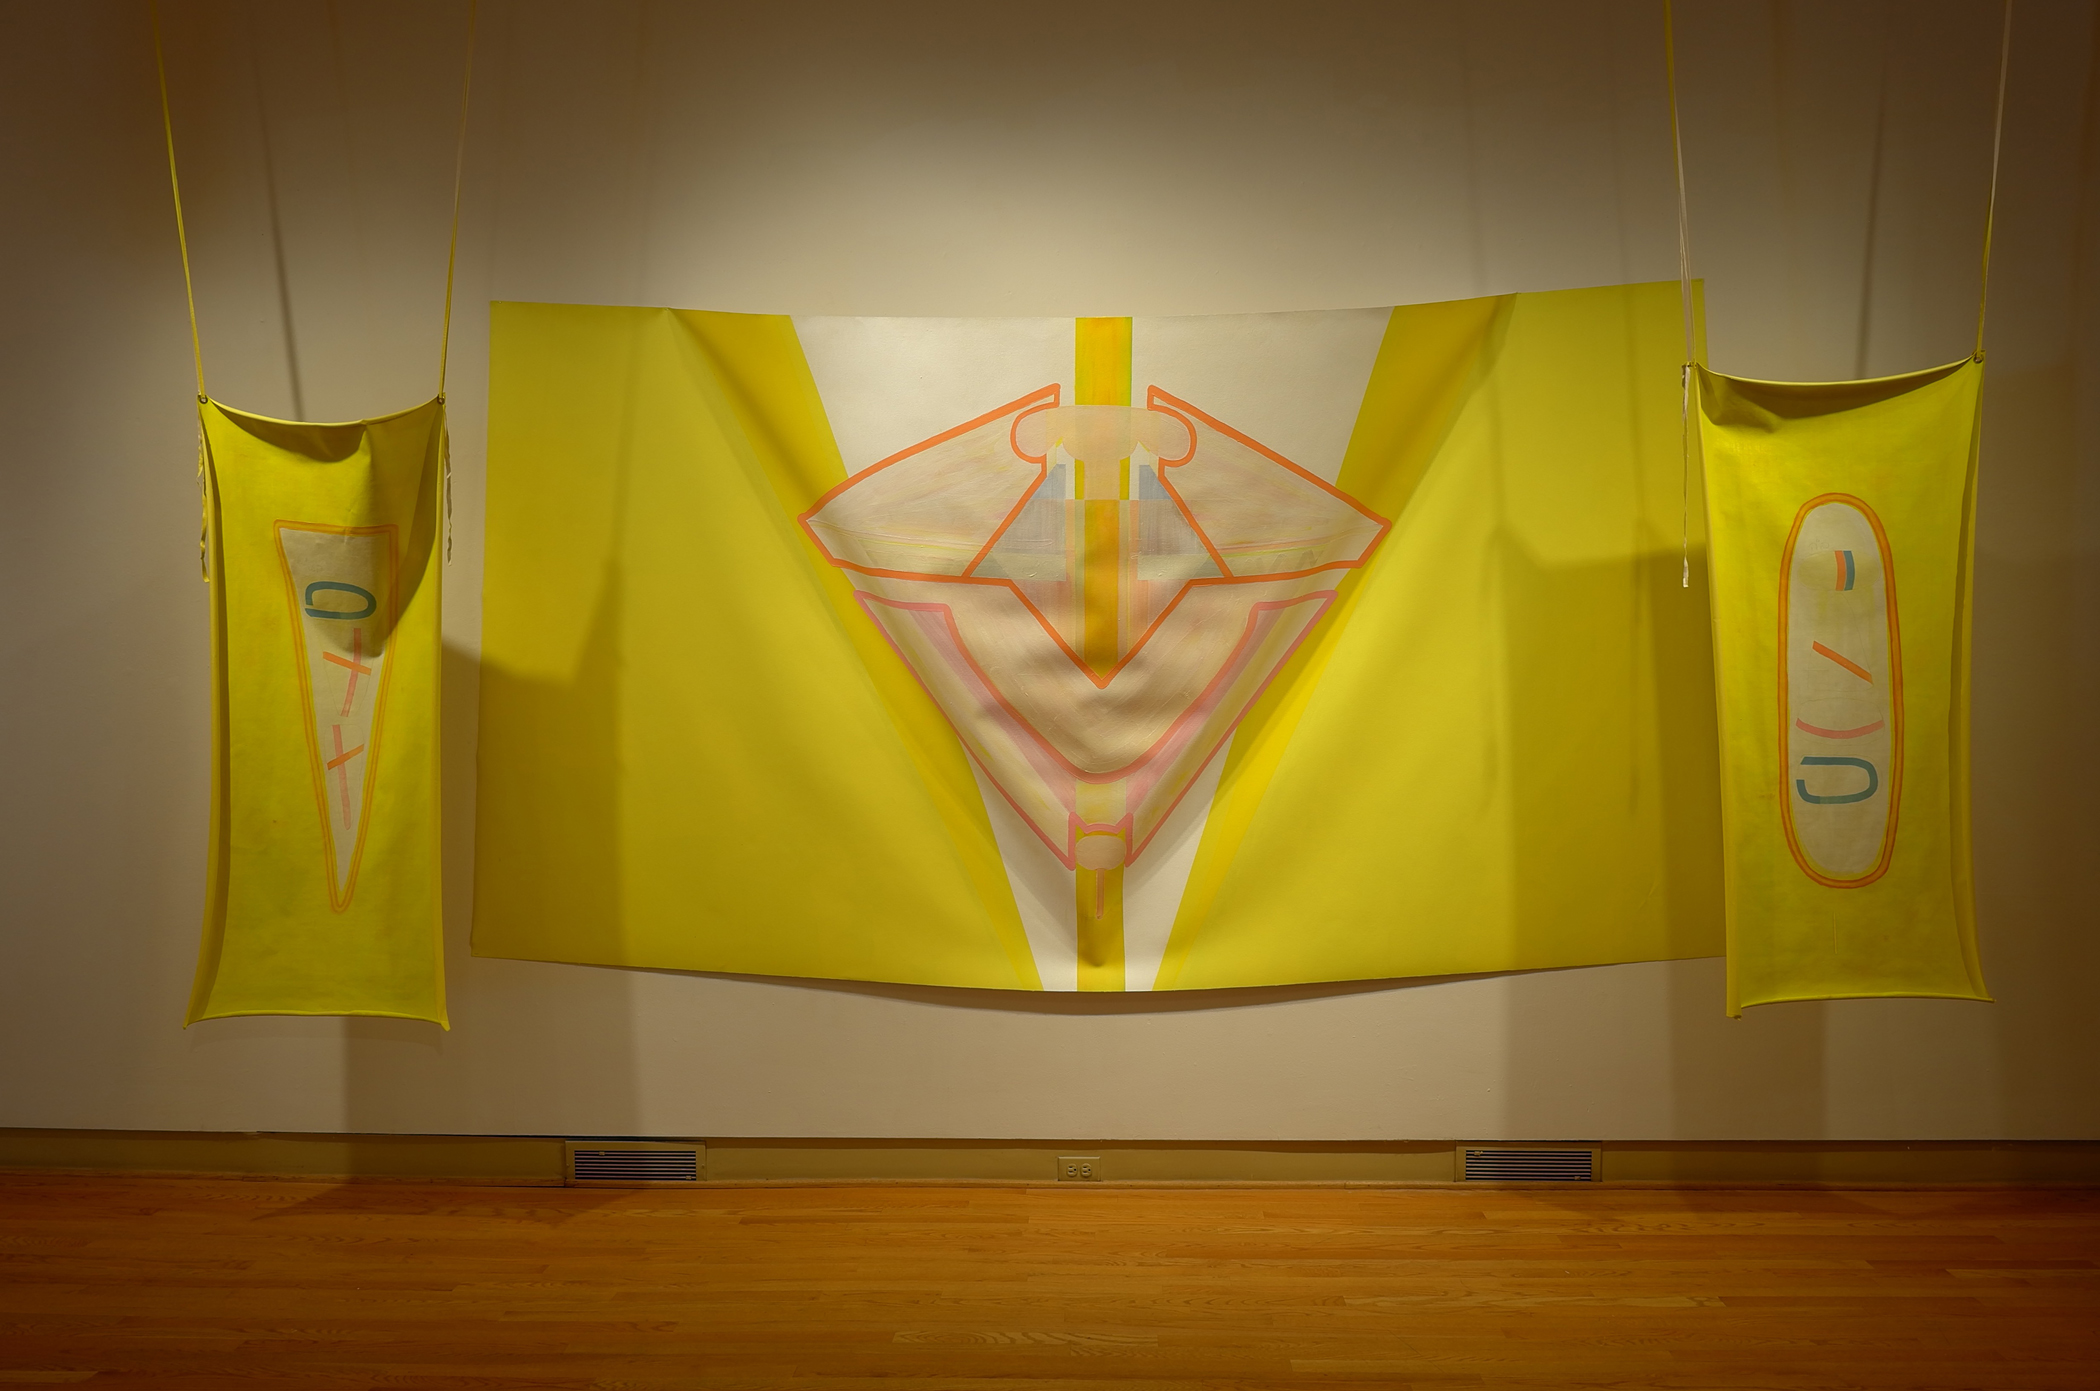 Roni Packer, Trying to Paint G-d, 2018. Oil and latex paint on canvas, 136 x 70 inches (center) and 25 x 60 inches (left and right). Packer’s primarily yellow and pink flag-like canvas slumps softly from the wall while flanked by two hanging banners containing pink and blue semi-geometric markings. Photo courtesy of the Ukrainian Institute of Modern Art.